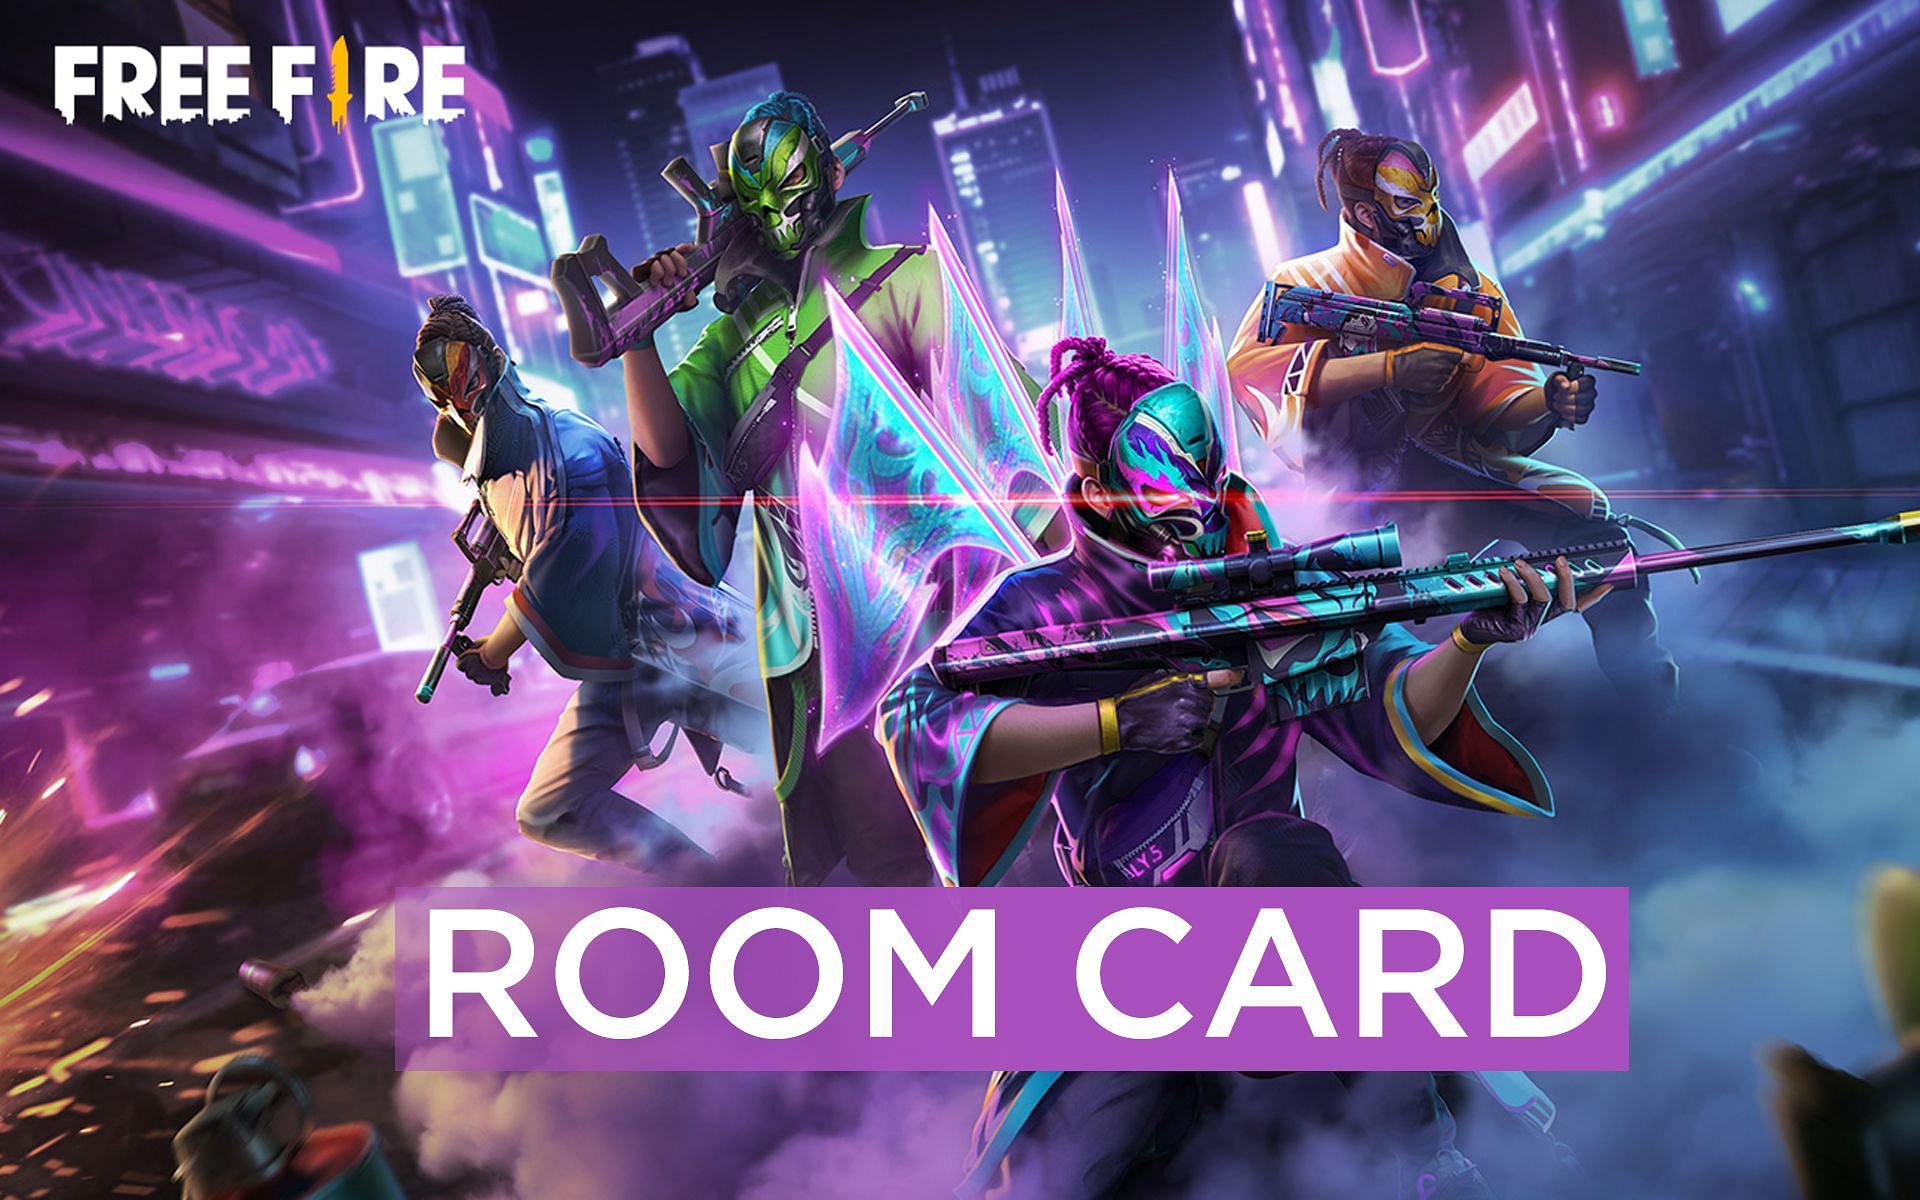 Mobile gamers can win a Room Card via Free Fire&#039;s After Party event (Image via Sportskeeda)